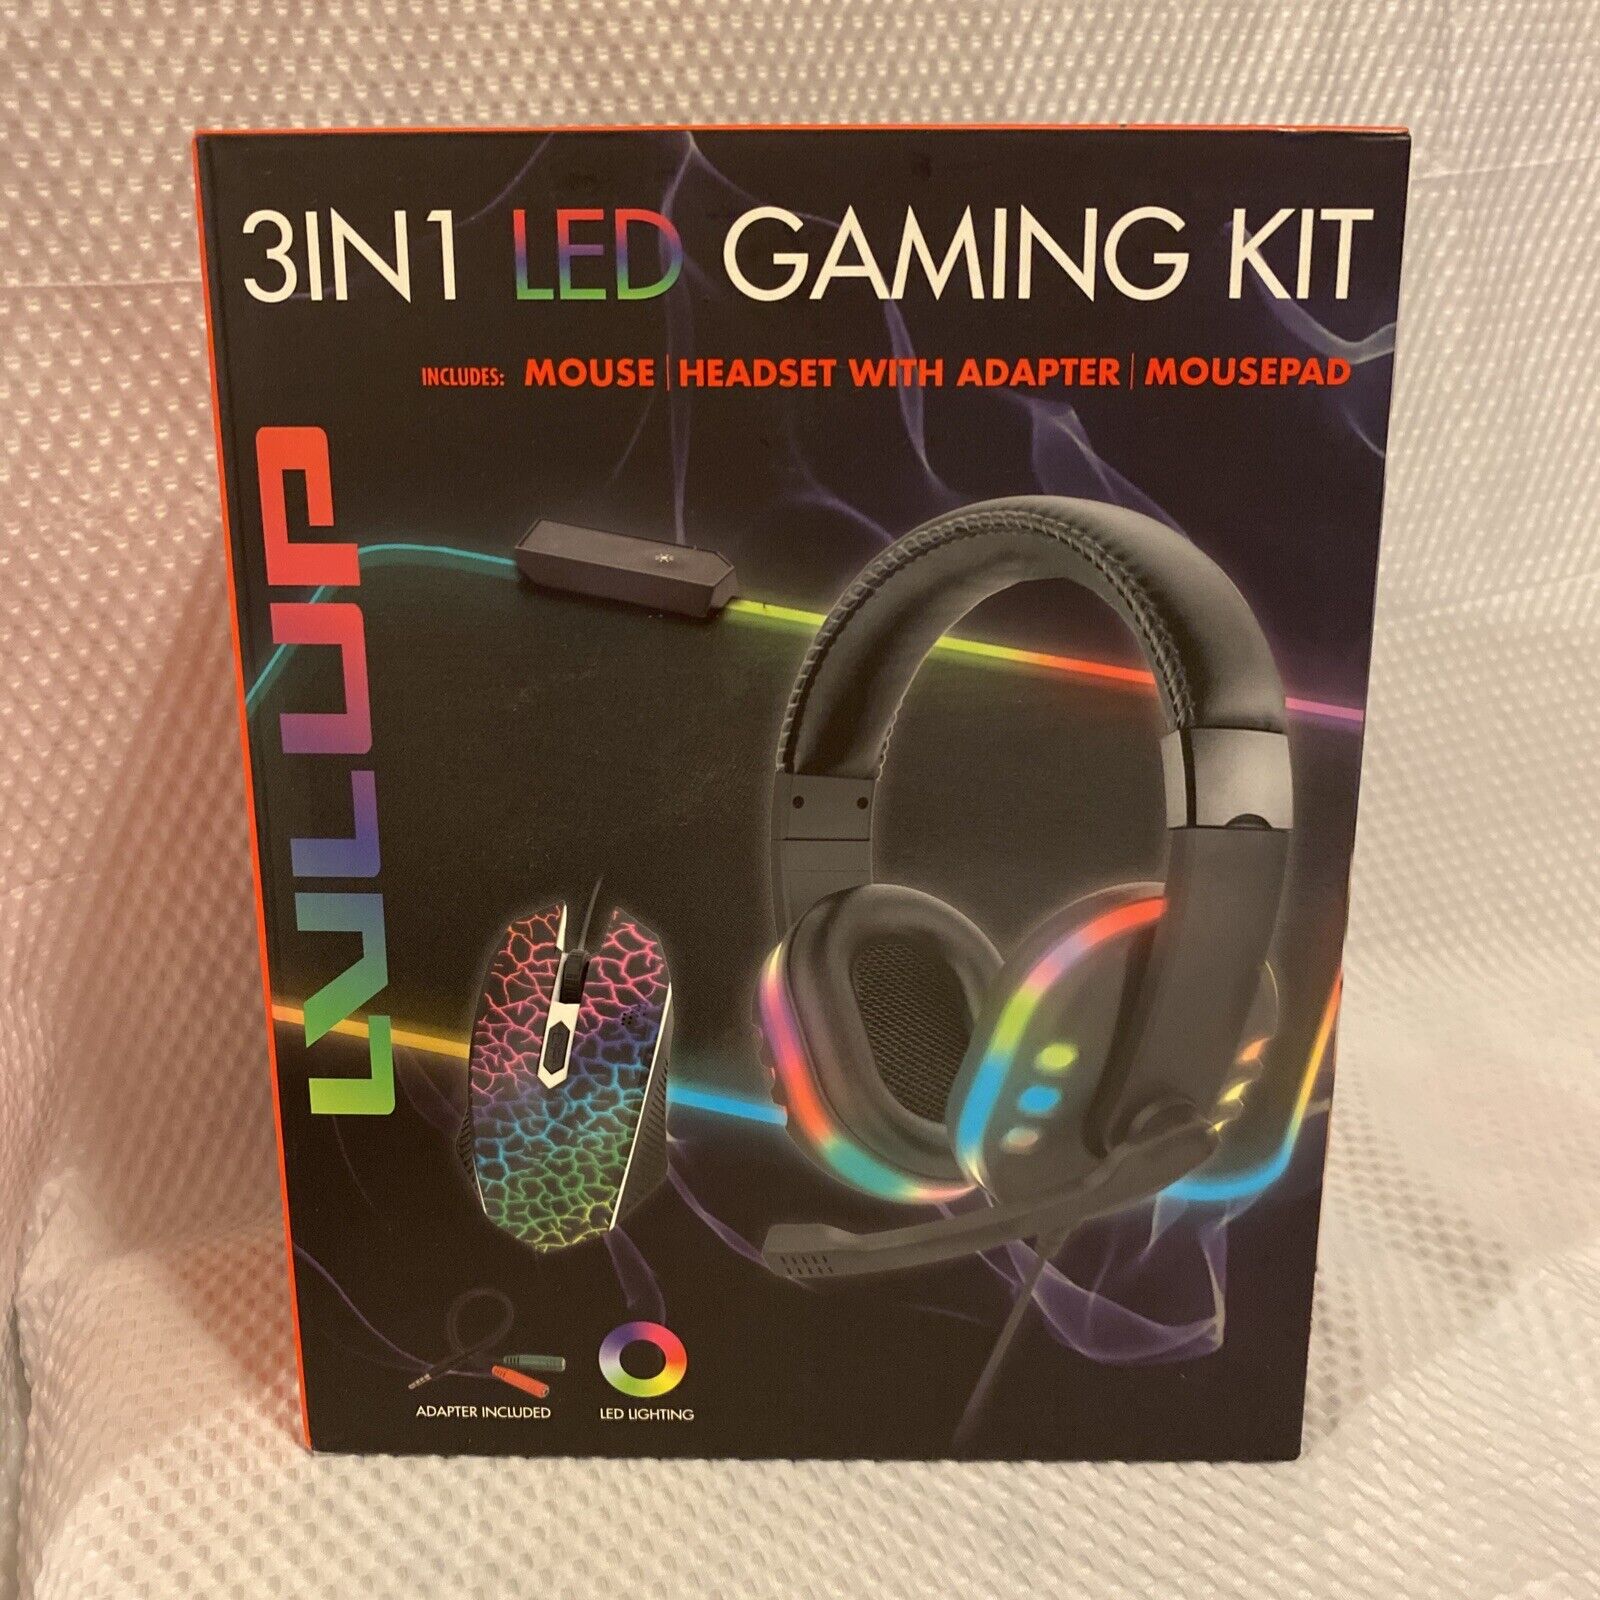 LVLUP 3 IN 1 LED GAMING KIT MOUSE HEADSET WITH ADAPTER MOUSEPAD